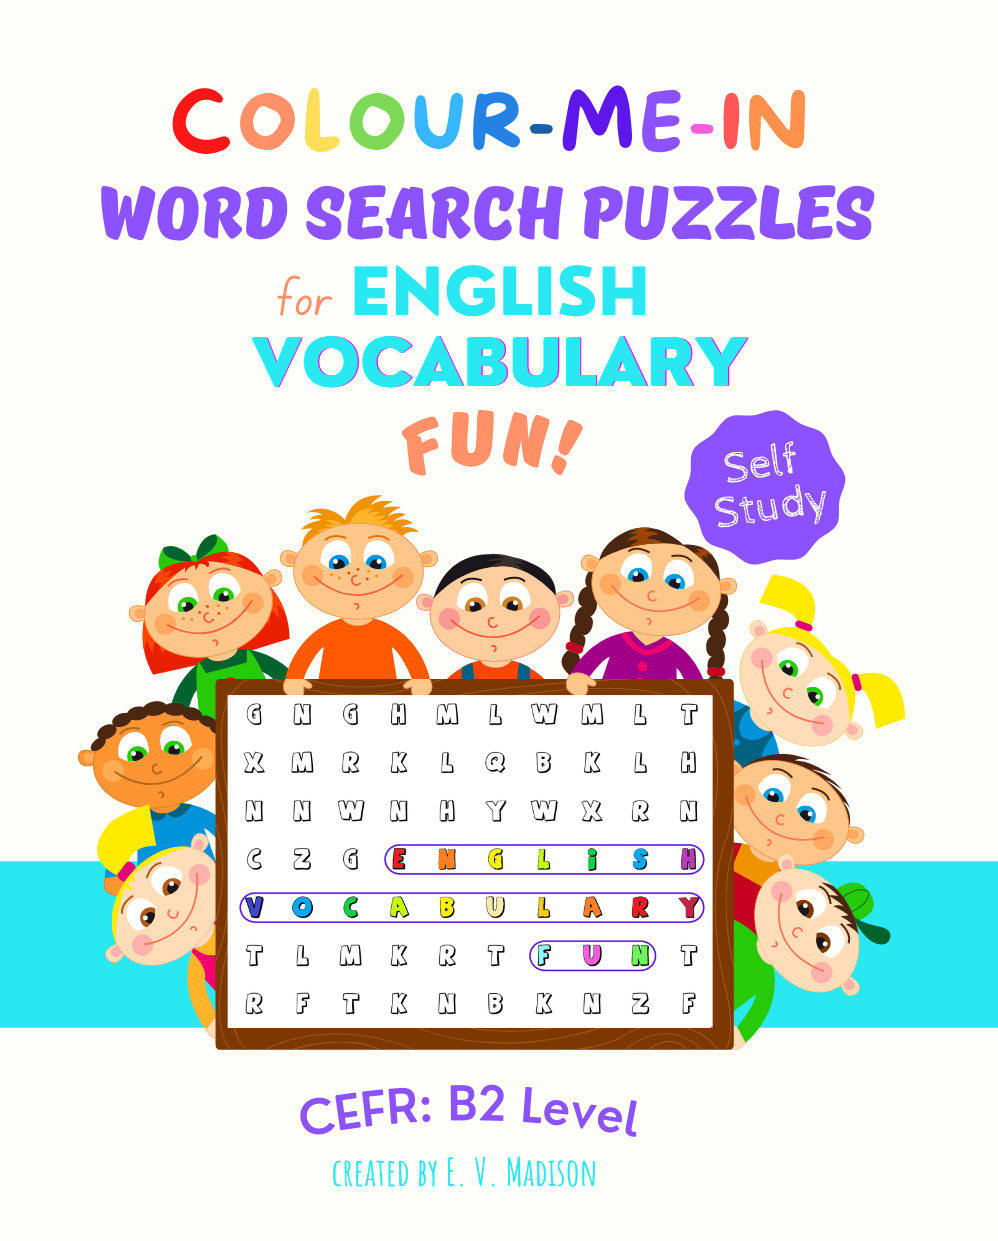 Colour-Me-In Word Search Puzzles for English Vocabulary Fun! B2 Level